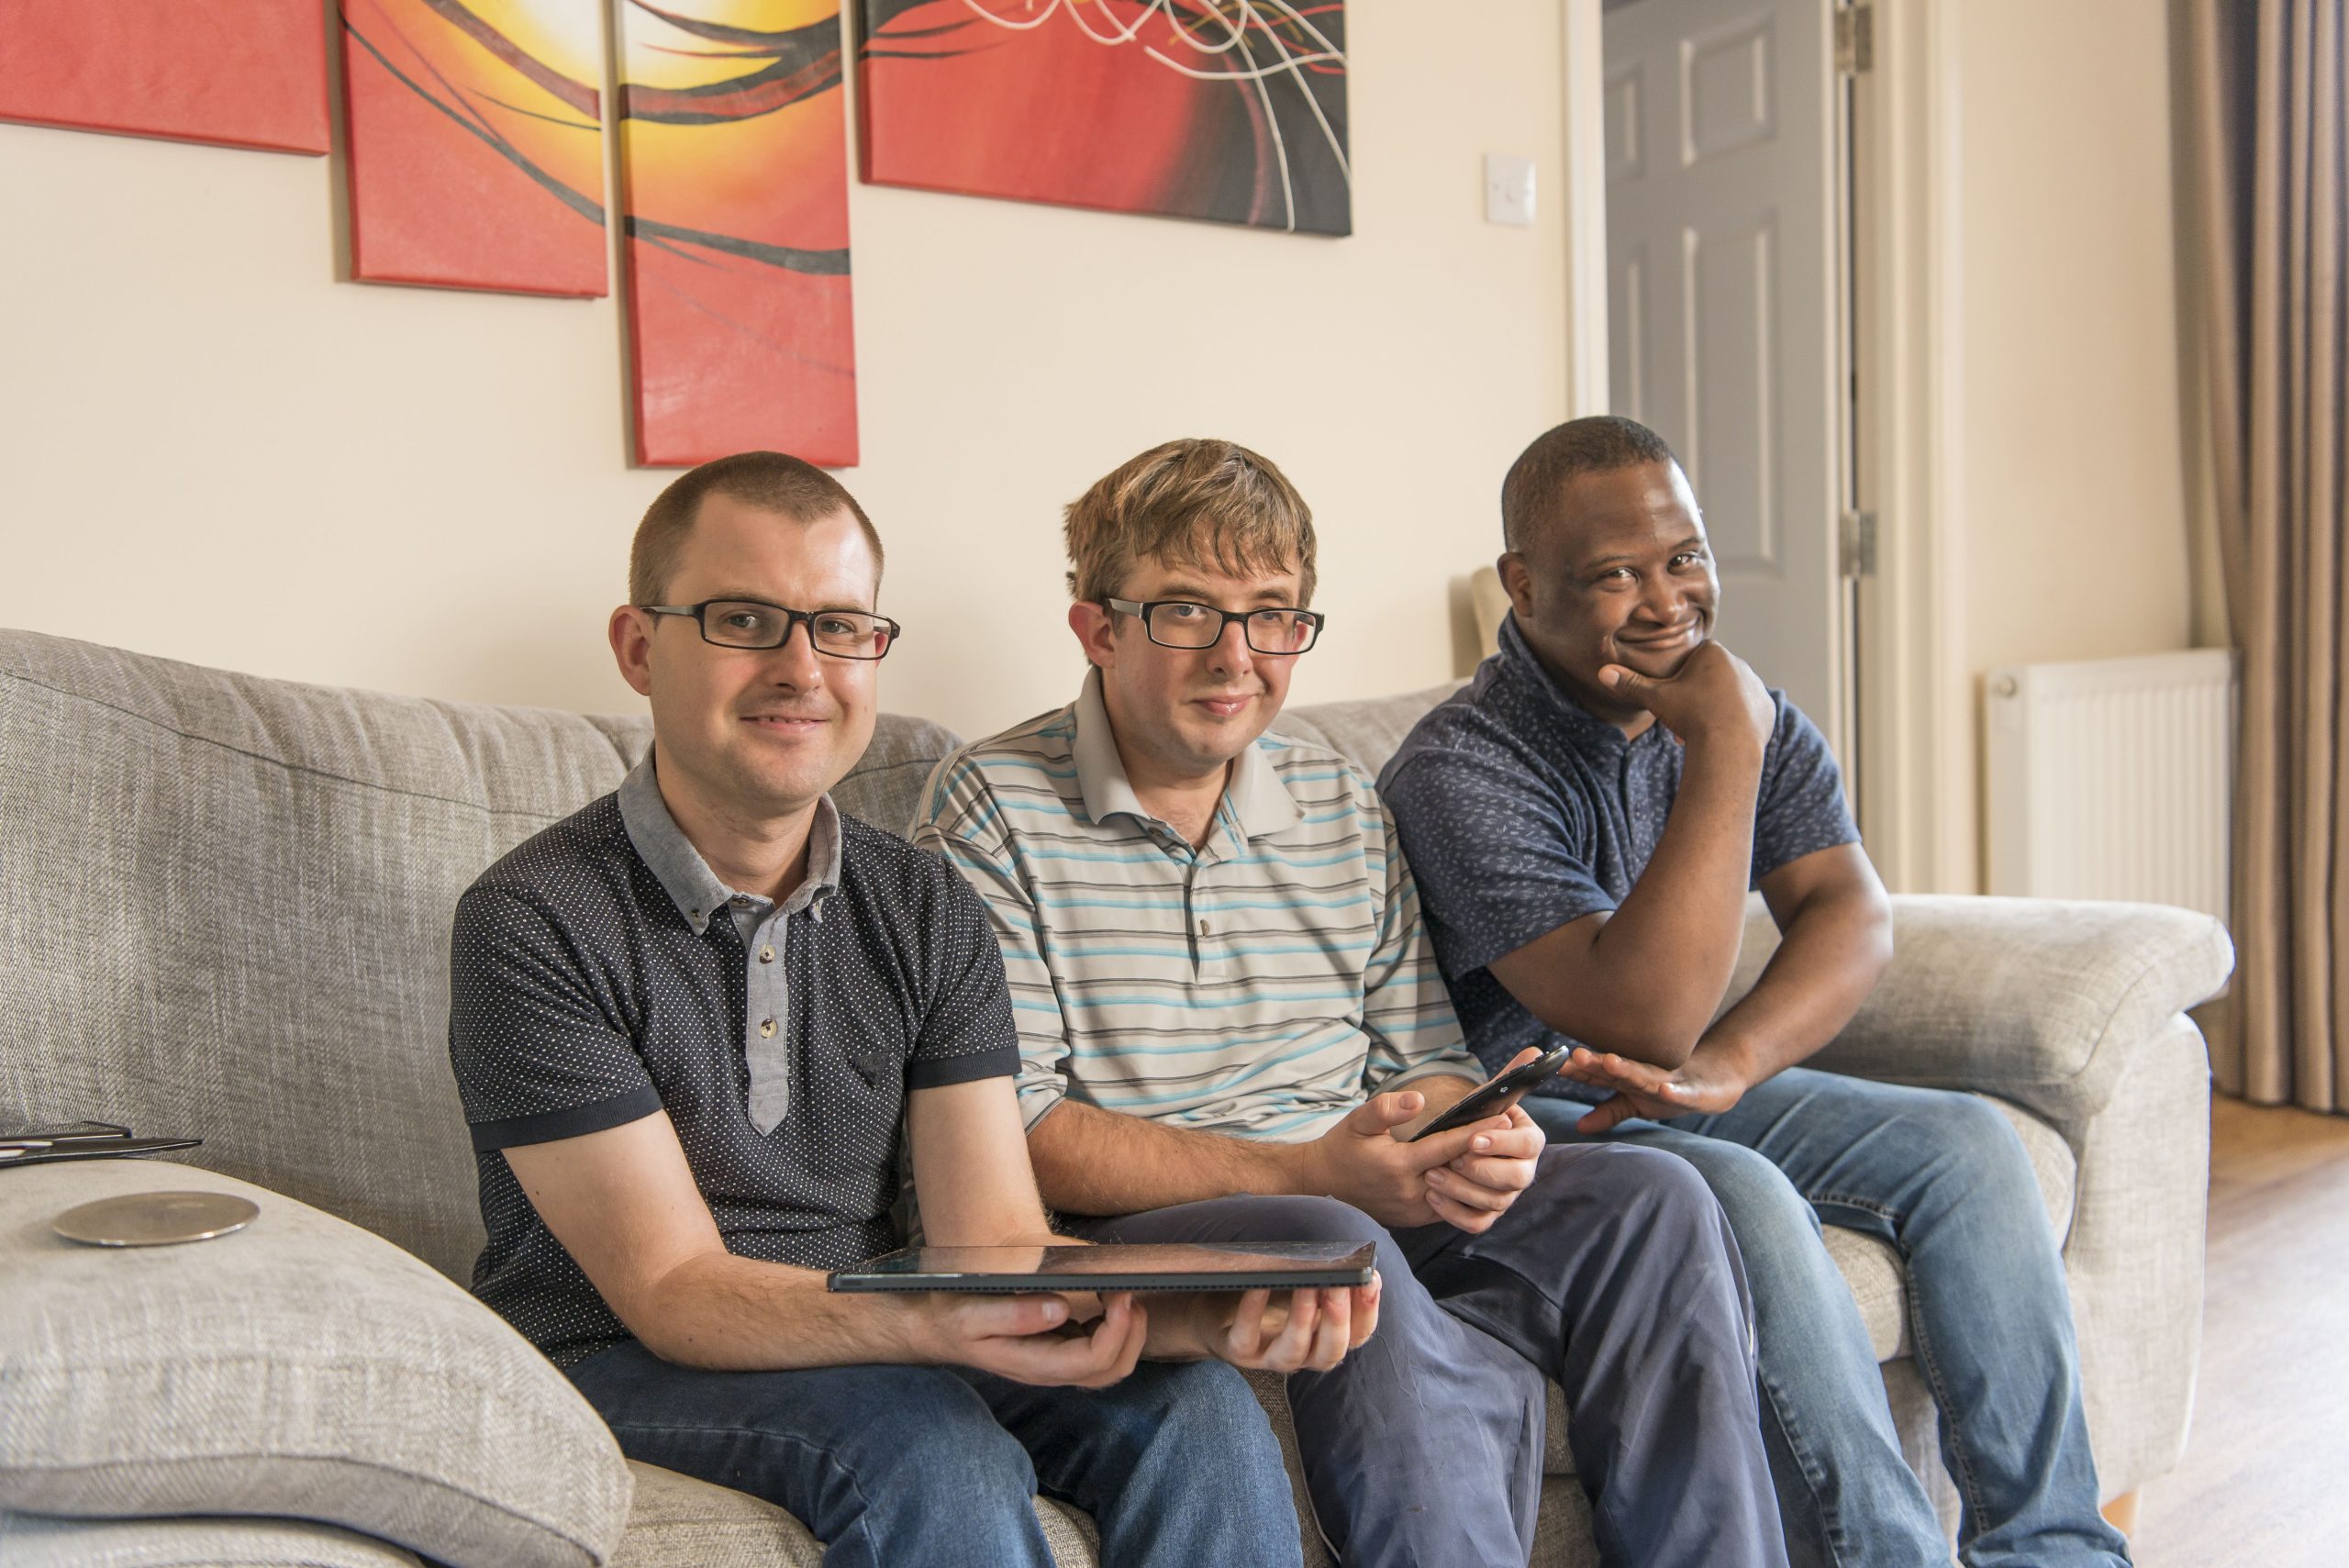 Robert, Daniel and Frank in their supported living home